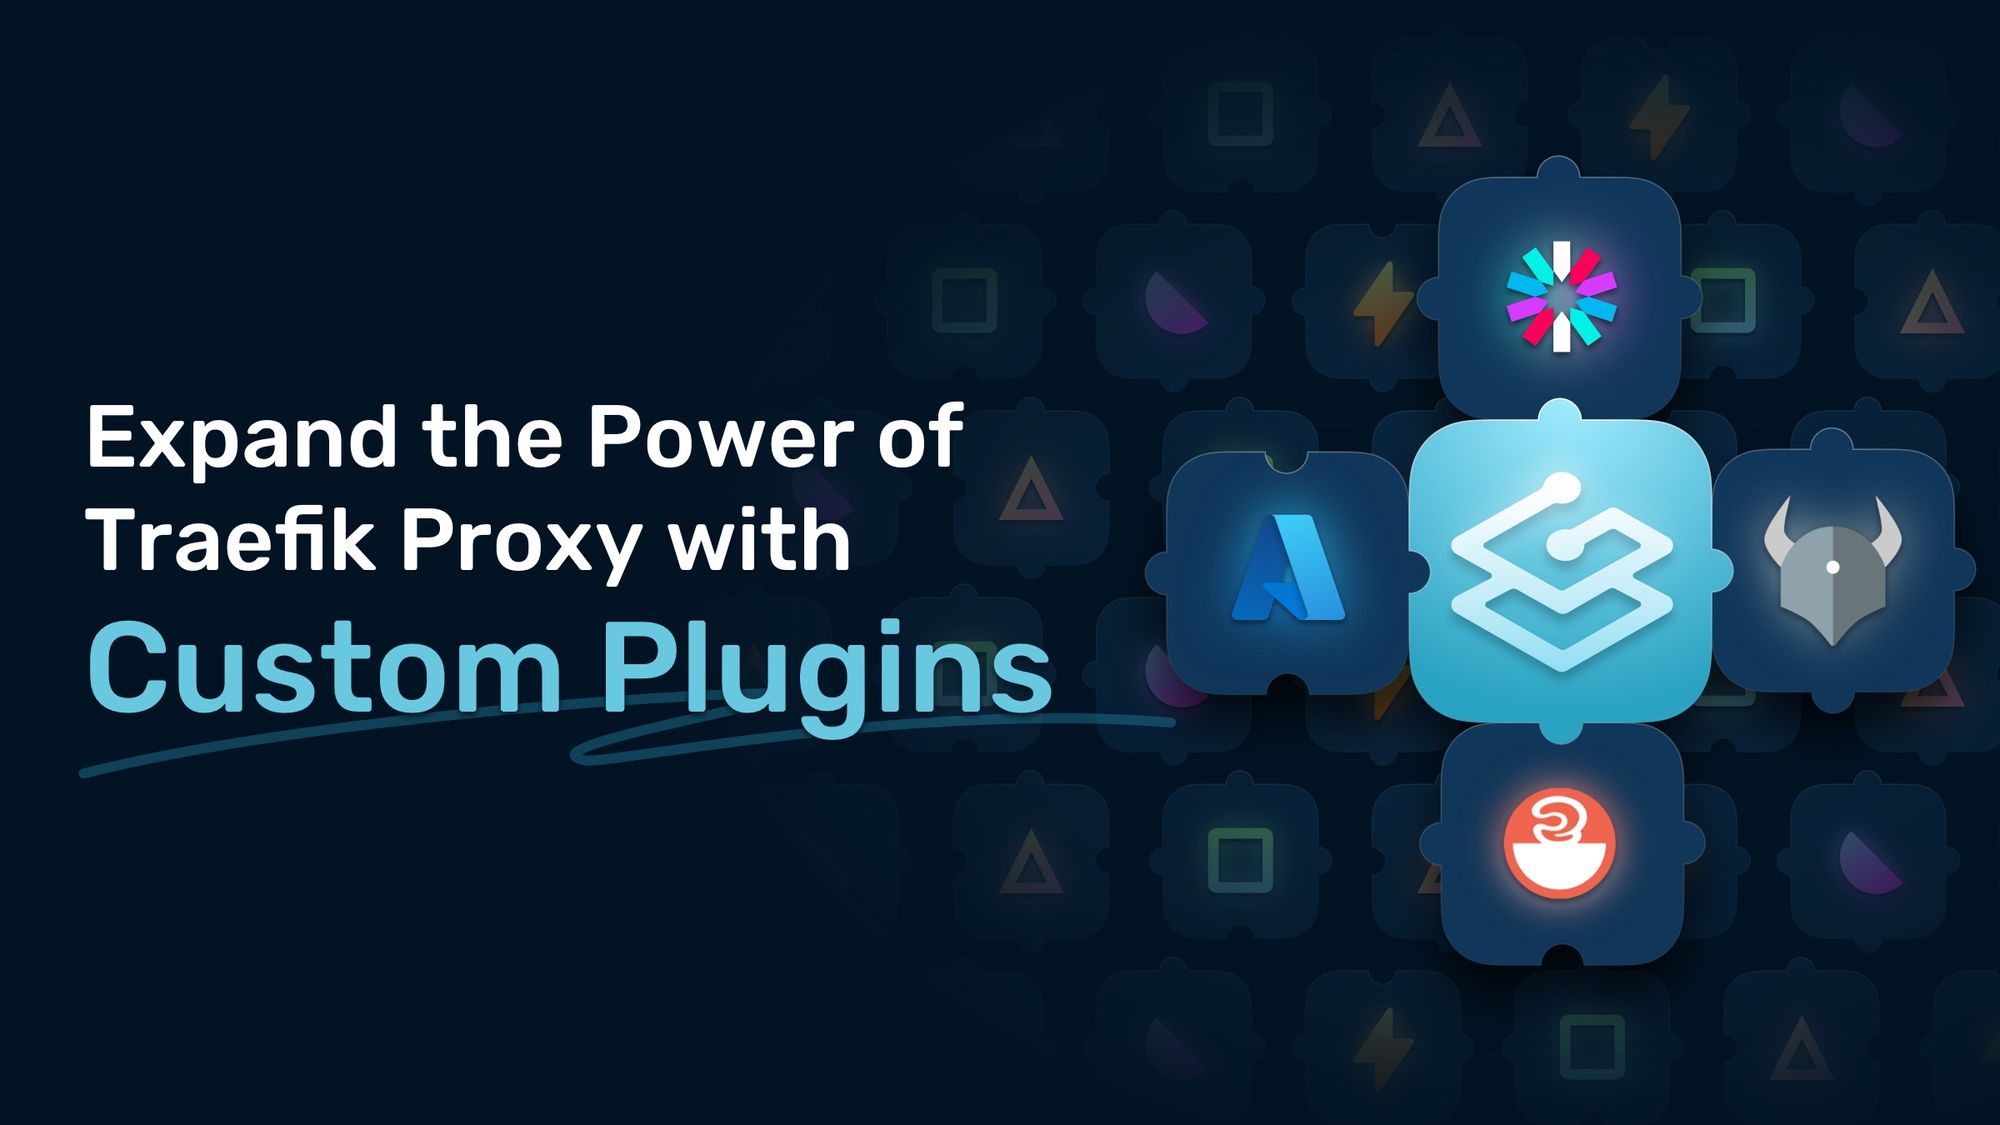 expand the power of traefik proxy with custom pugins